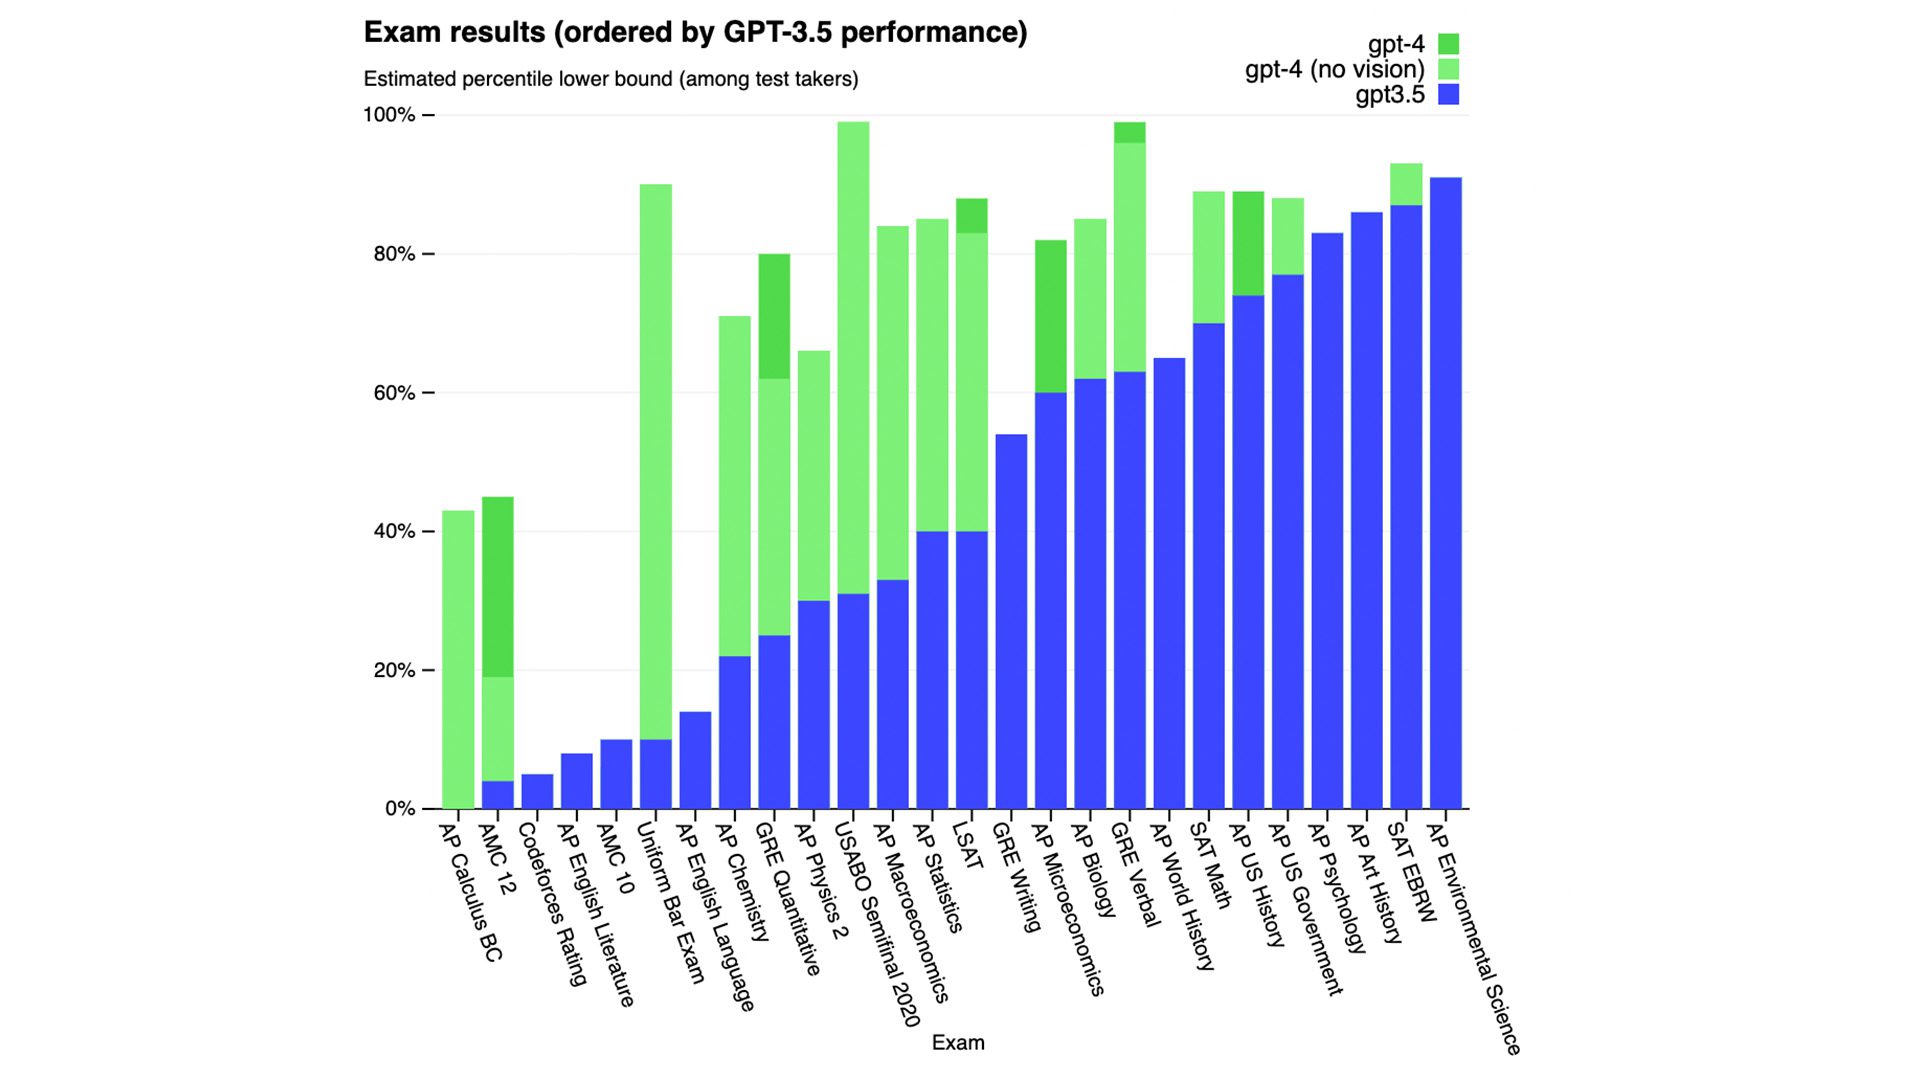 Exam results of GPT3 and GPT-4